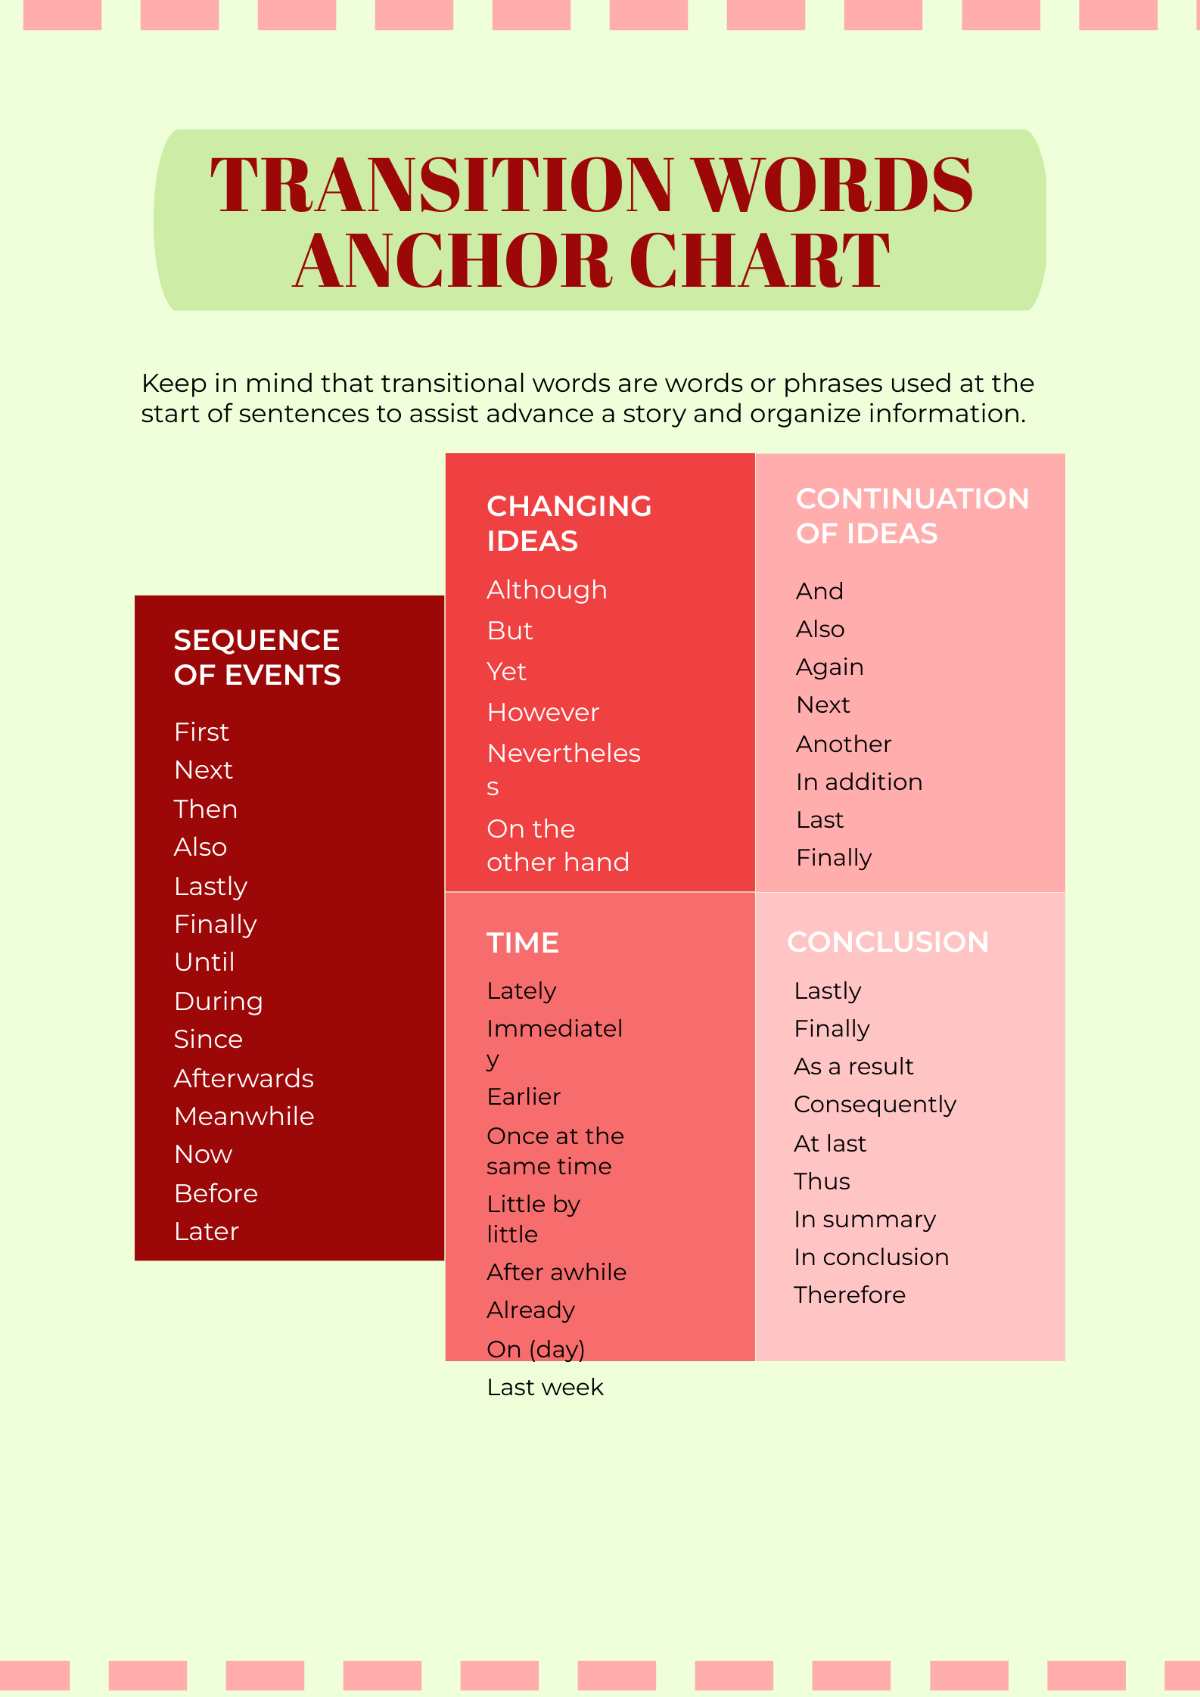 Free Transition Words Anchor Chart Template